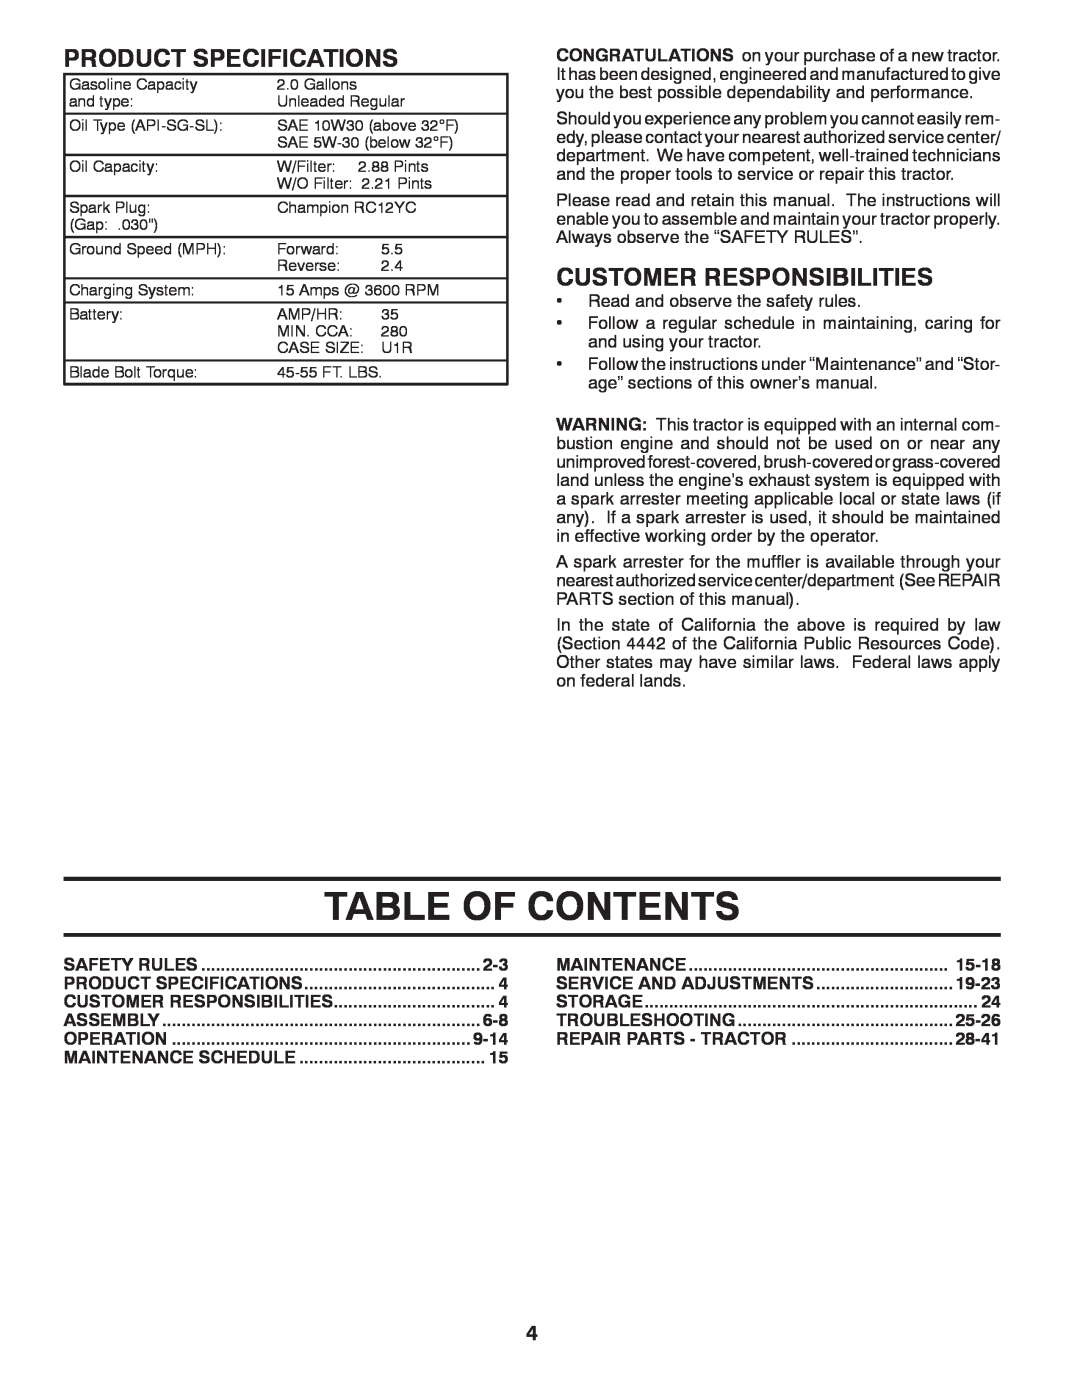 Husqvarna LTH1797 owner manual Table Of Contents, Product Specifications, Customer Responsibilities 